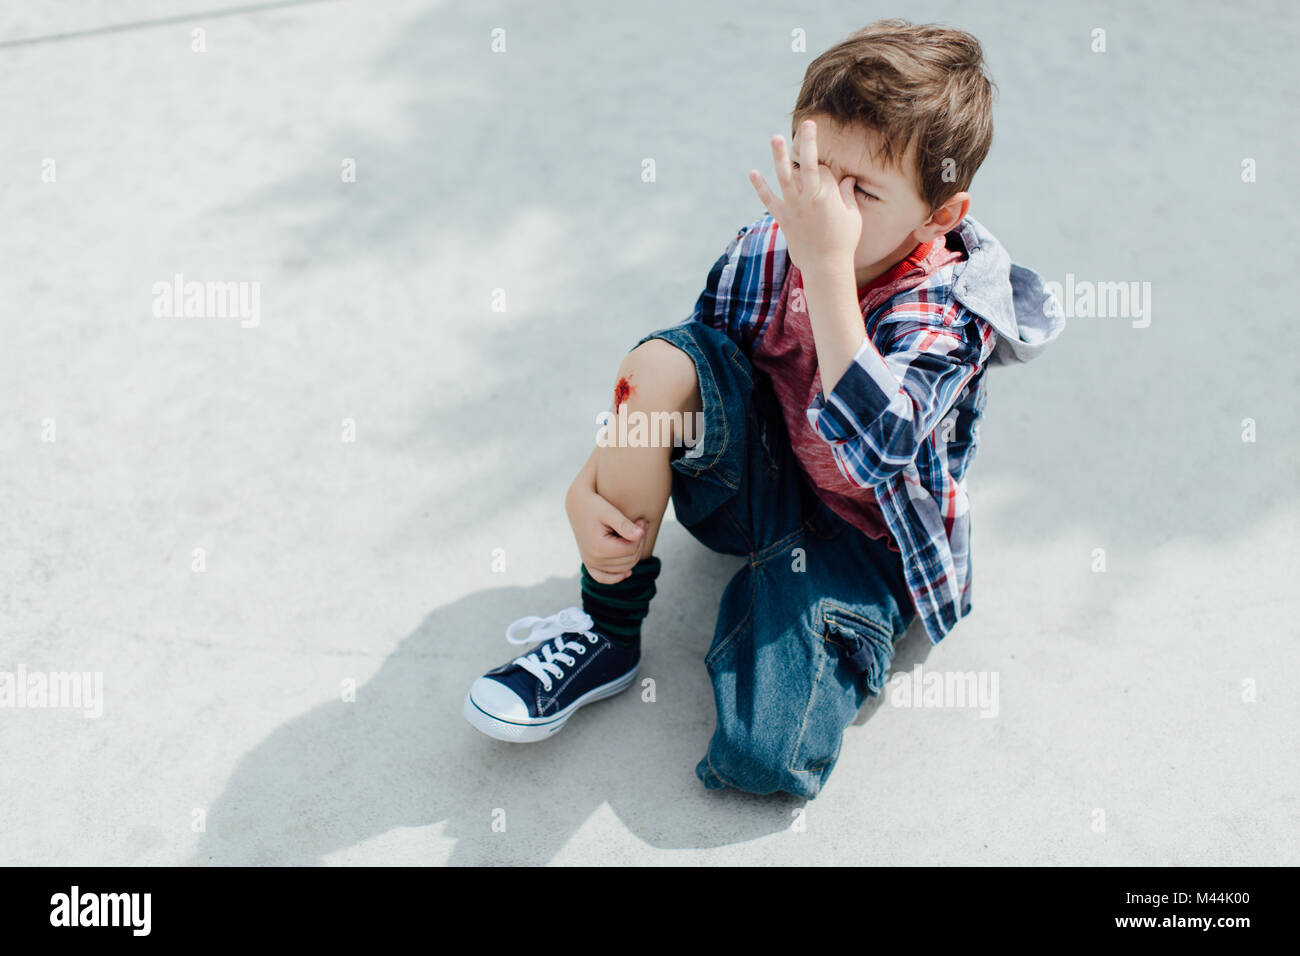 Injured little boy sitting on concrete floor with a scraped knee Stock Photo